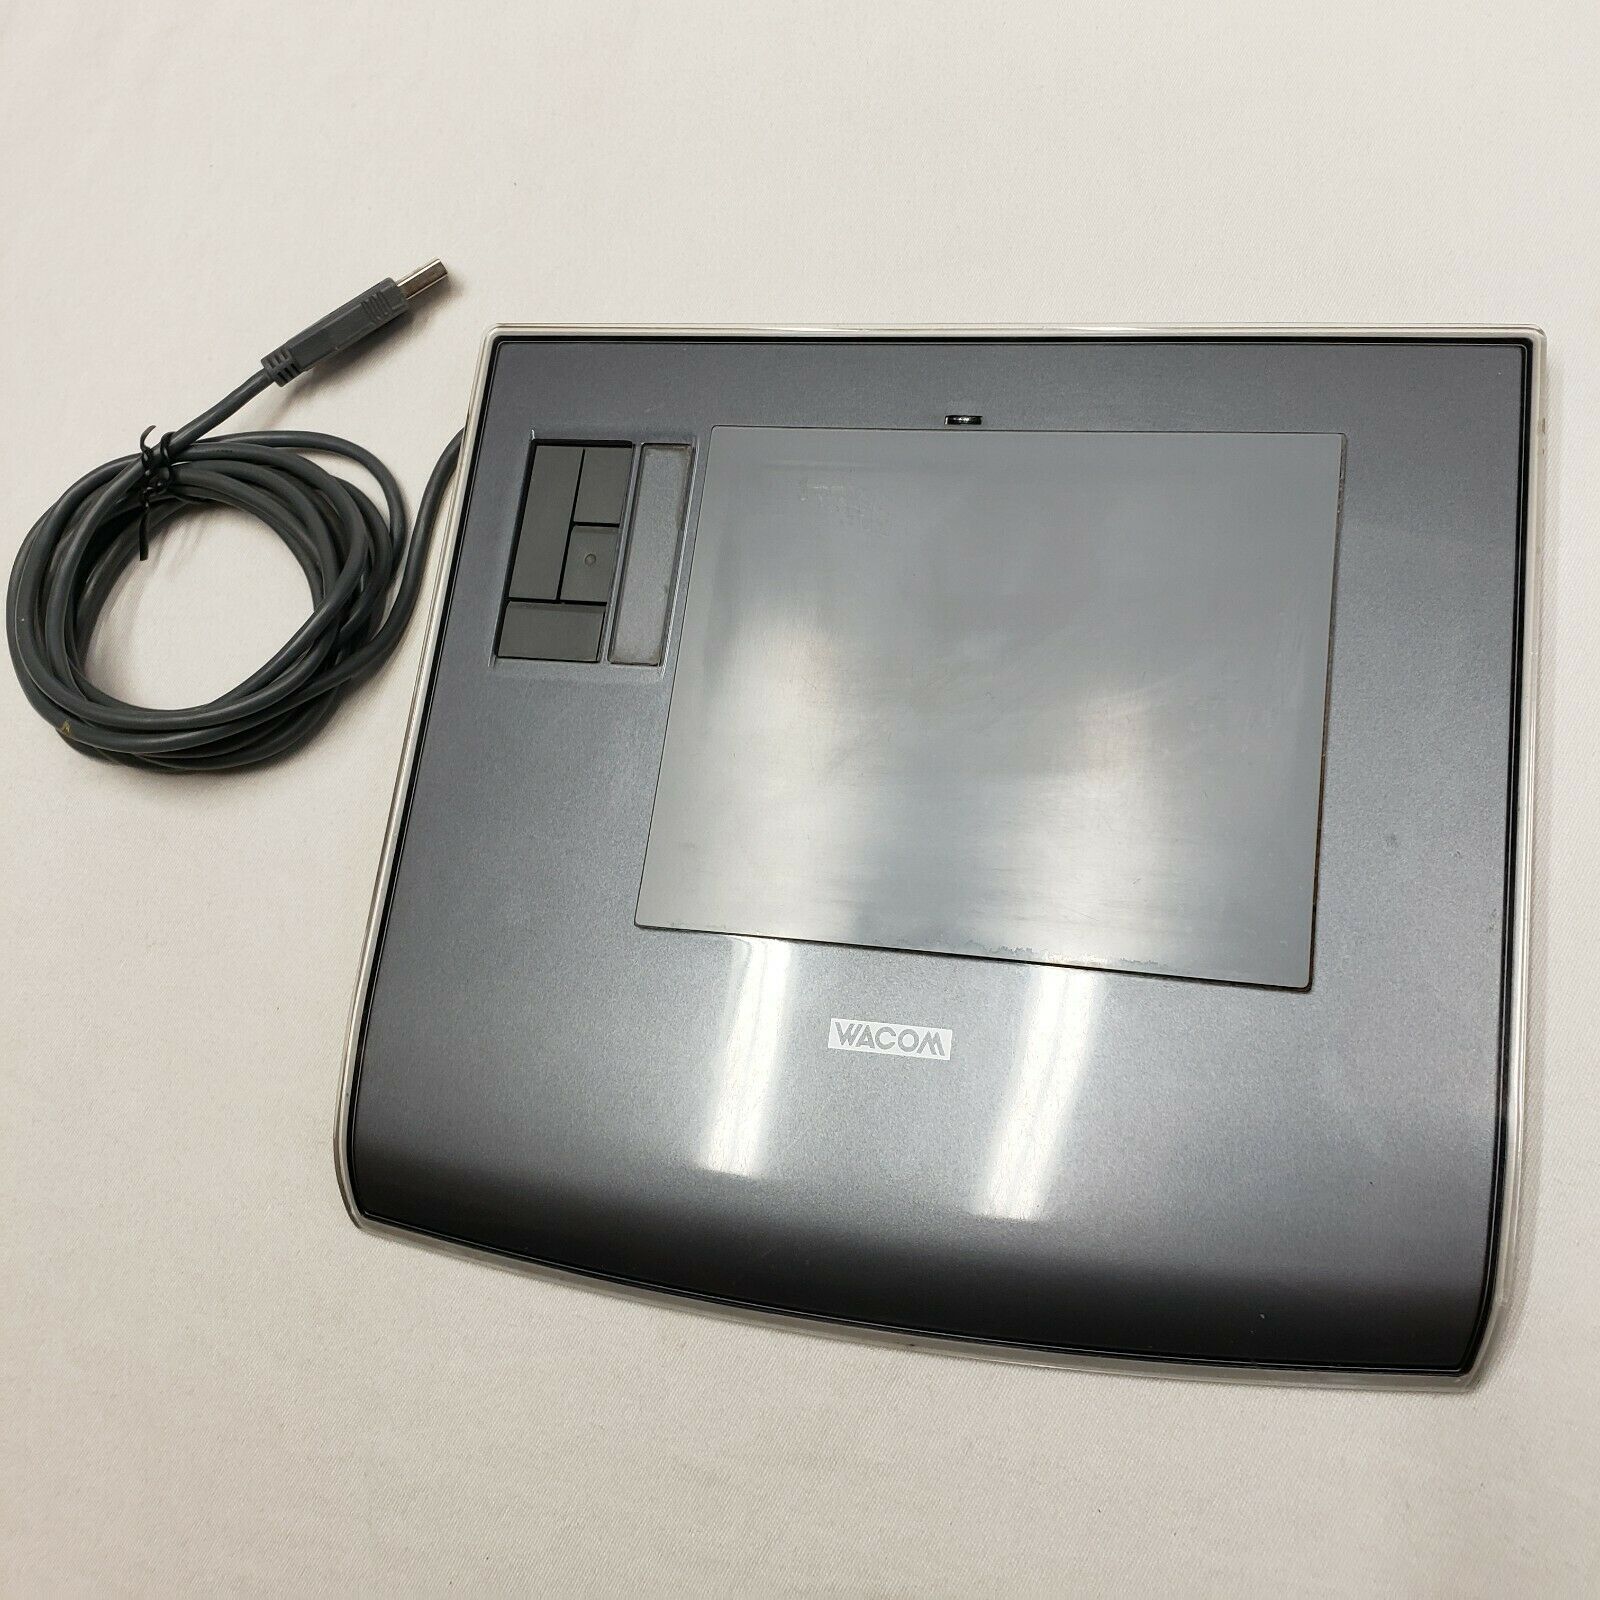 Wacom Intuos 3 Graphics Tablet PTZ-430 Tested and Works Tablet only